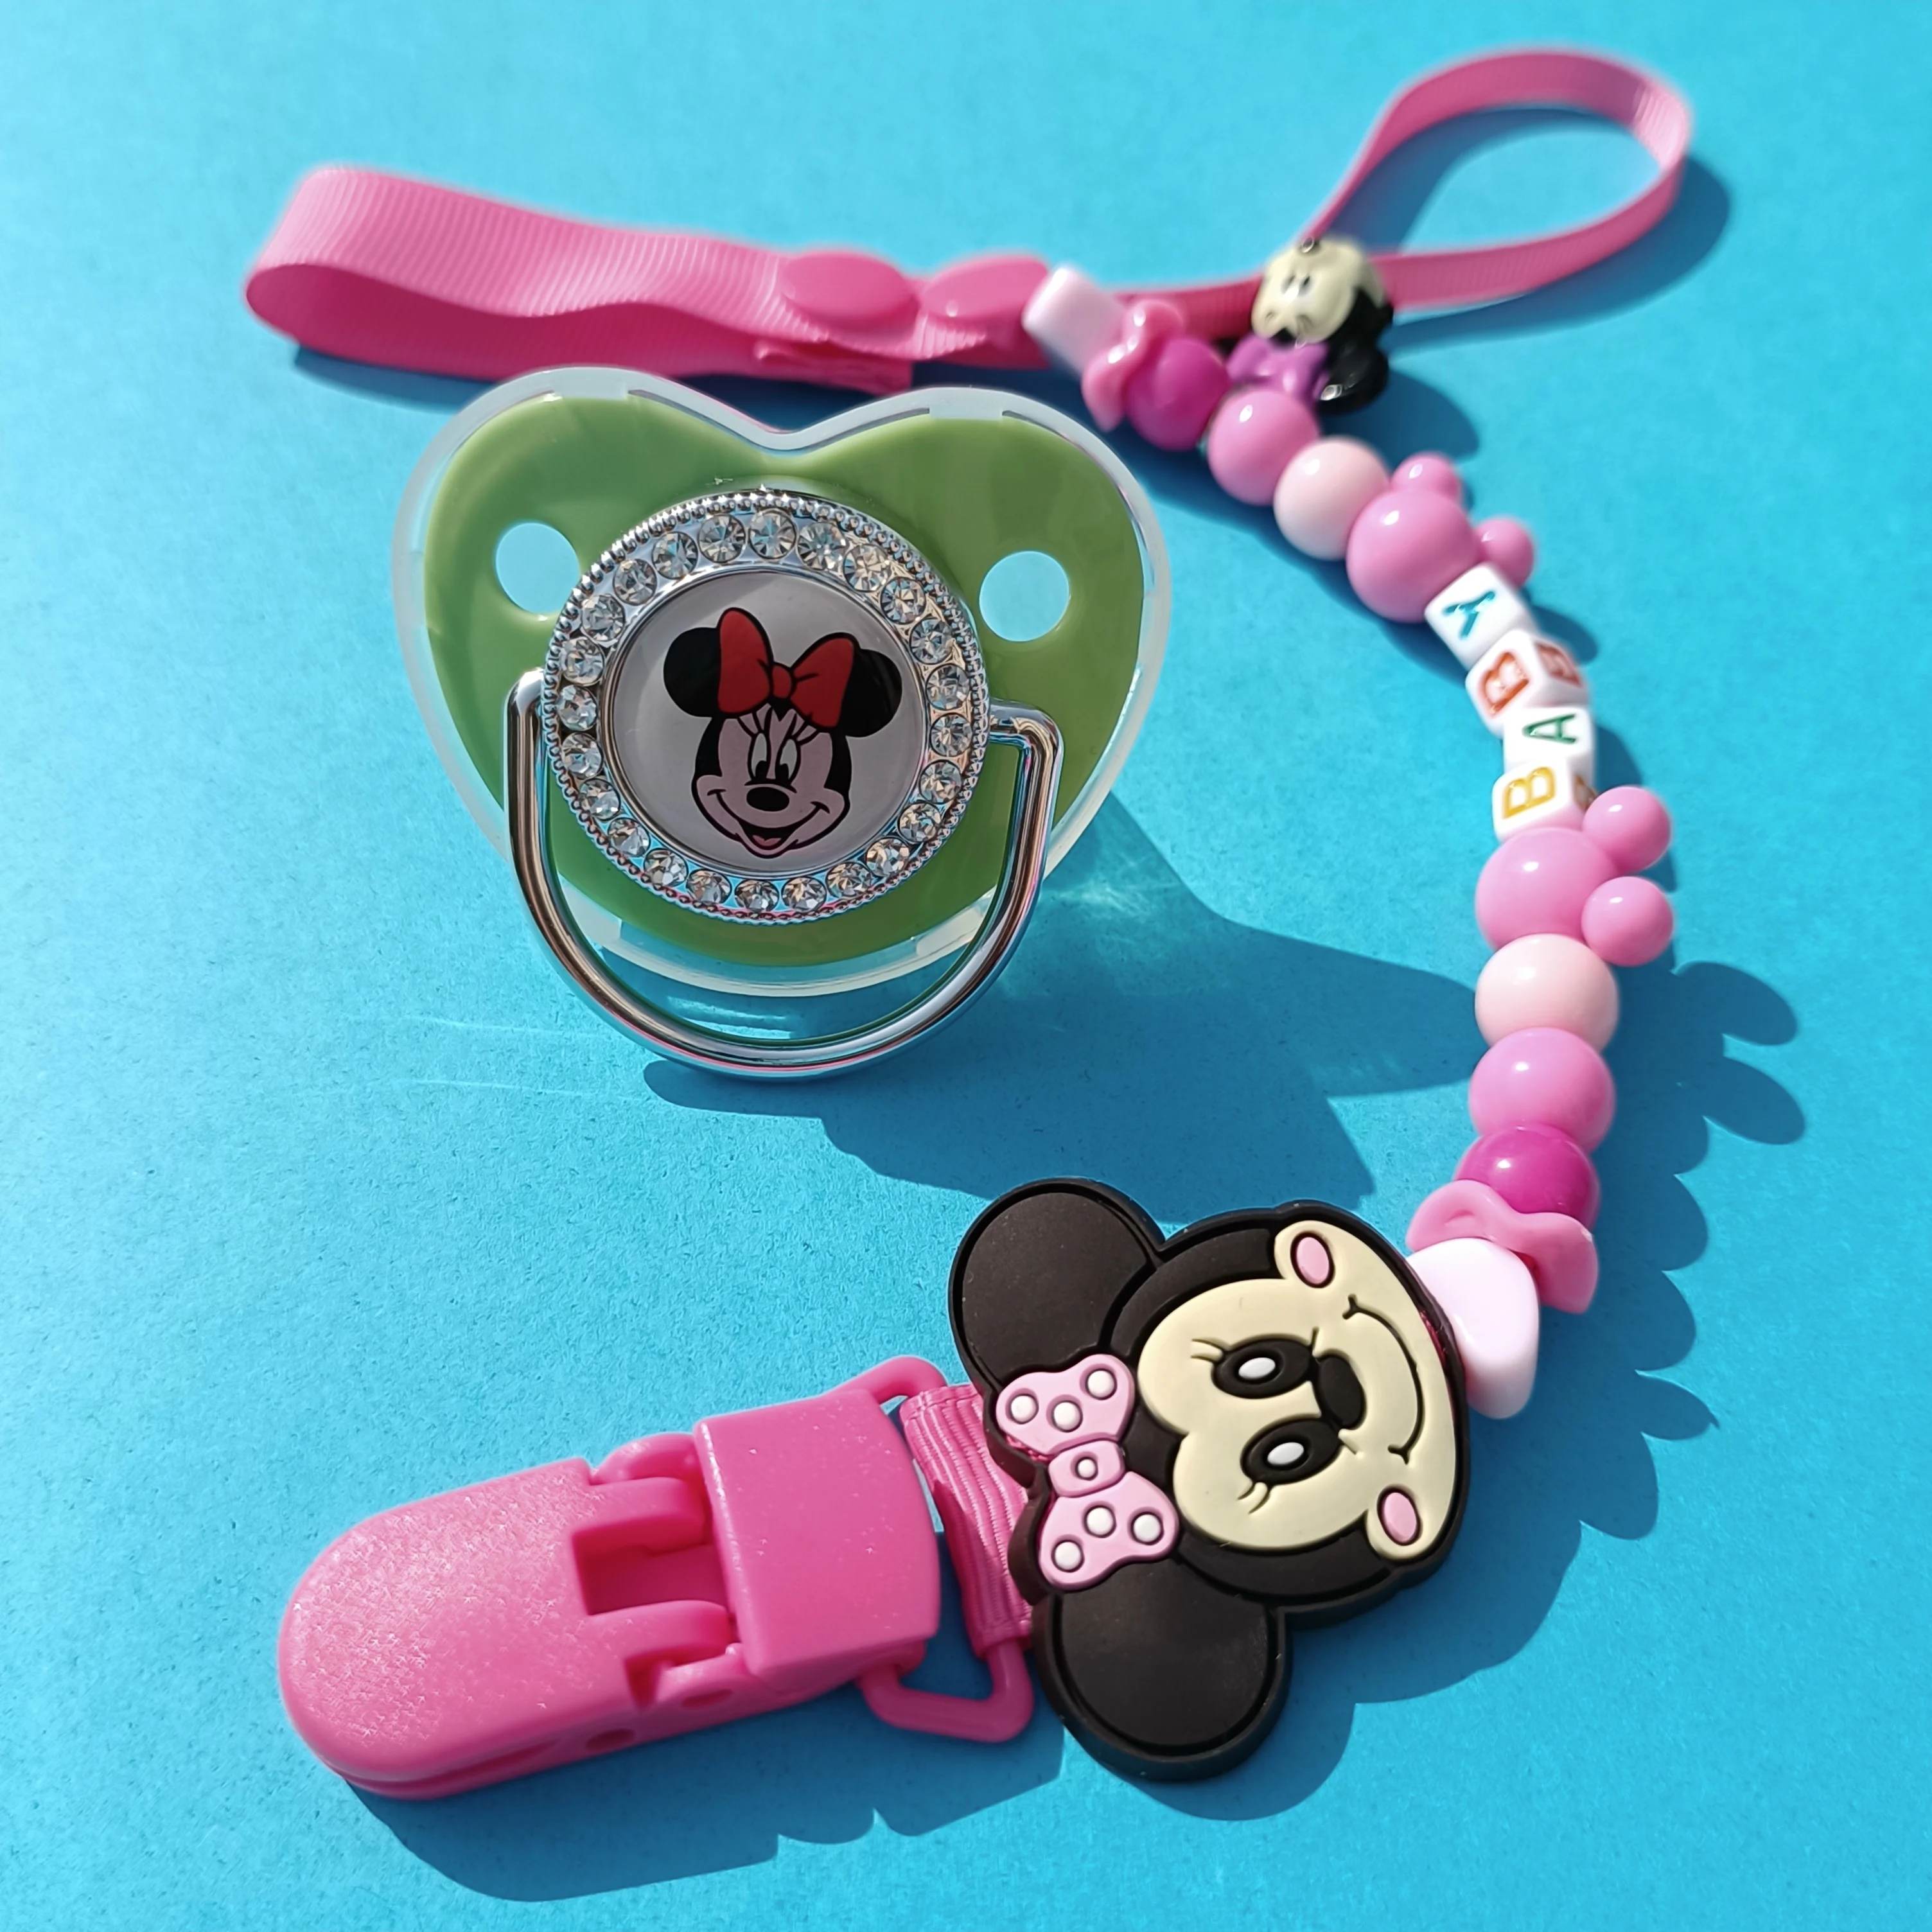 

Disney Baby Deluxe Pacifier with Pacifier Clip Silicone BPA Free Baby Pacifier for Newborn Baby Shower Bling Dummy Holder Gift